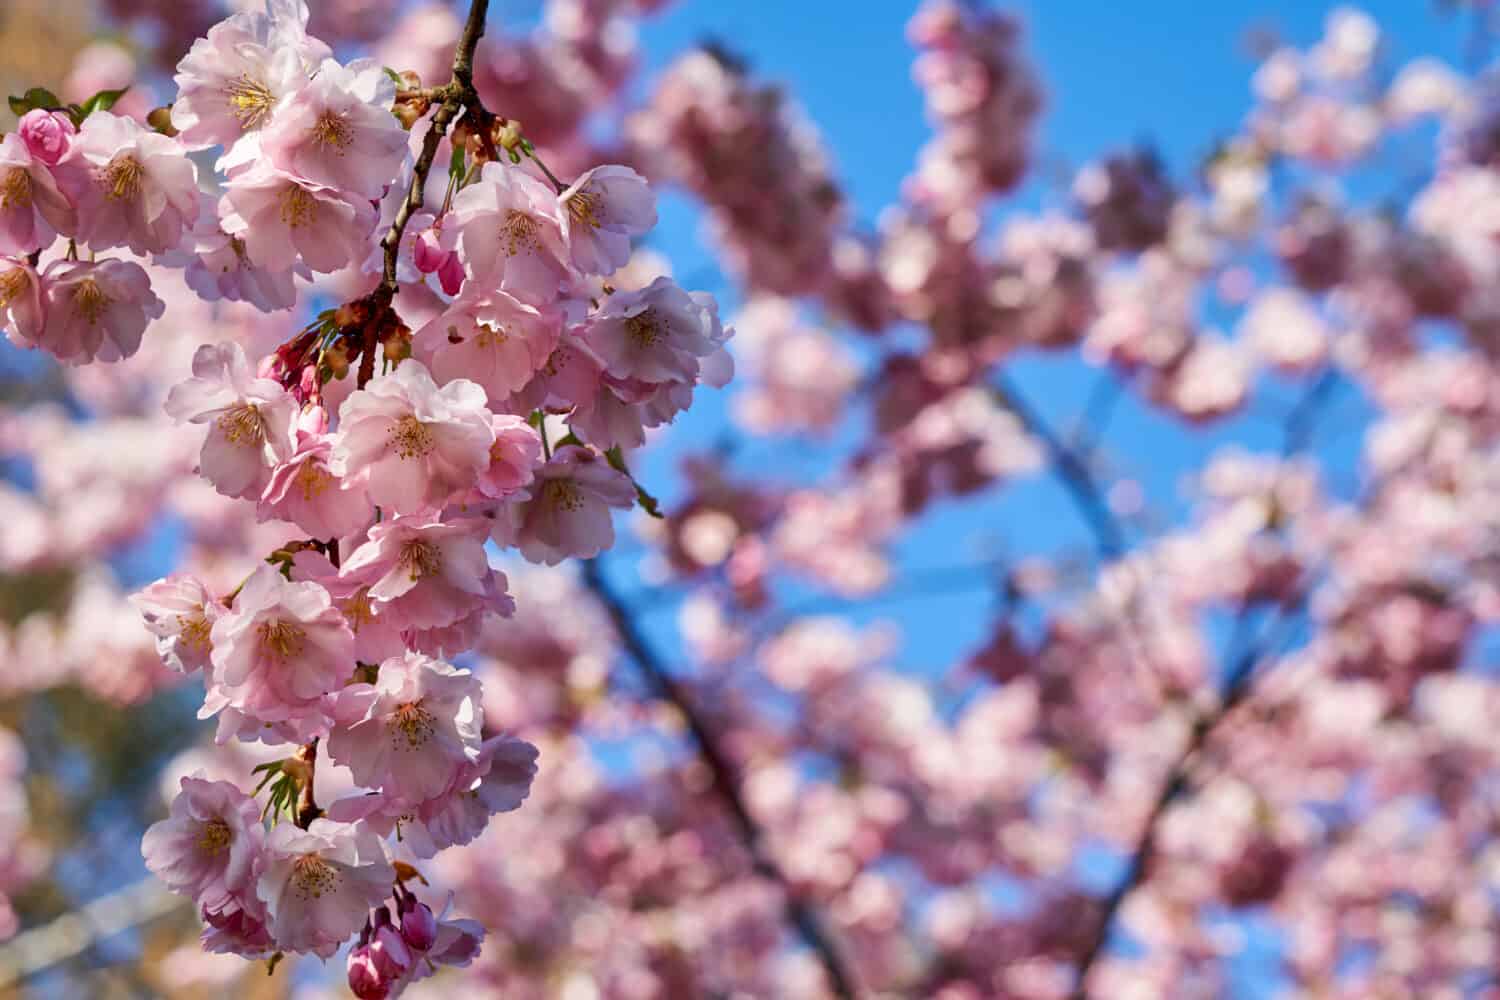 The Very Short, Symbolic Life of the Cherry Blossom